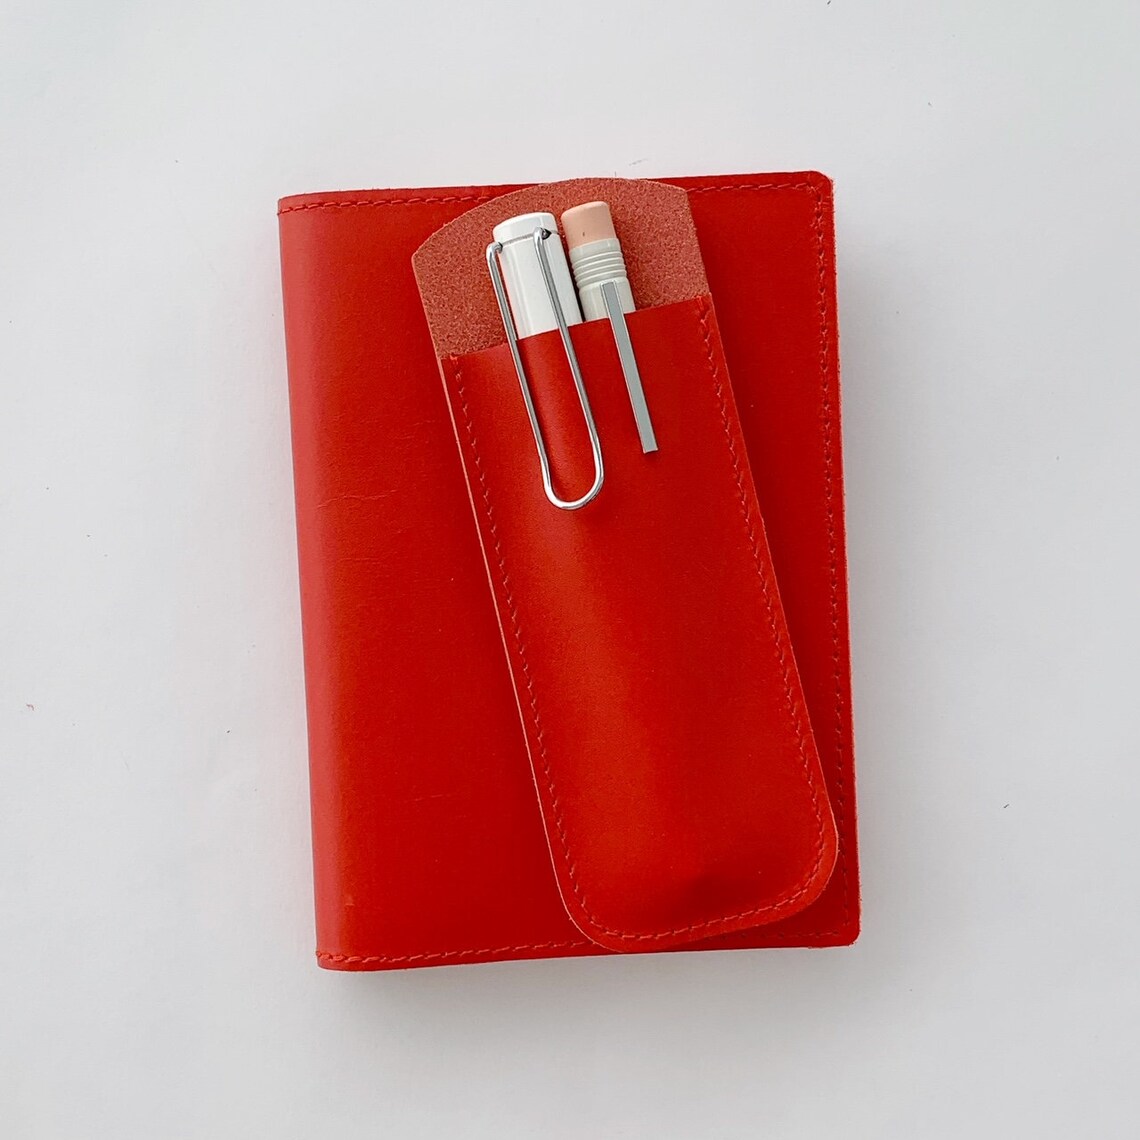 Hobonichi A6 Cover Leather Red Cover for Hobonichi Planner - Etsy UK